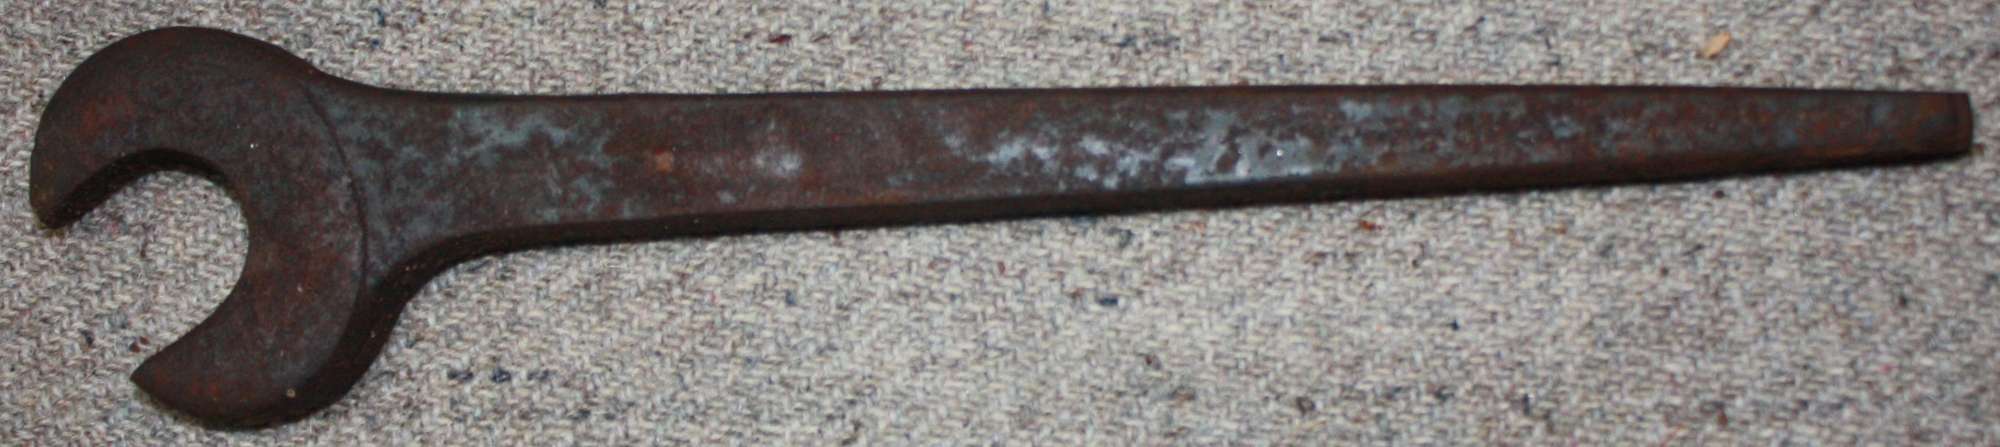 A WWII ANDERSON AIR RAID SHELTER RAT TAIL SPANNER